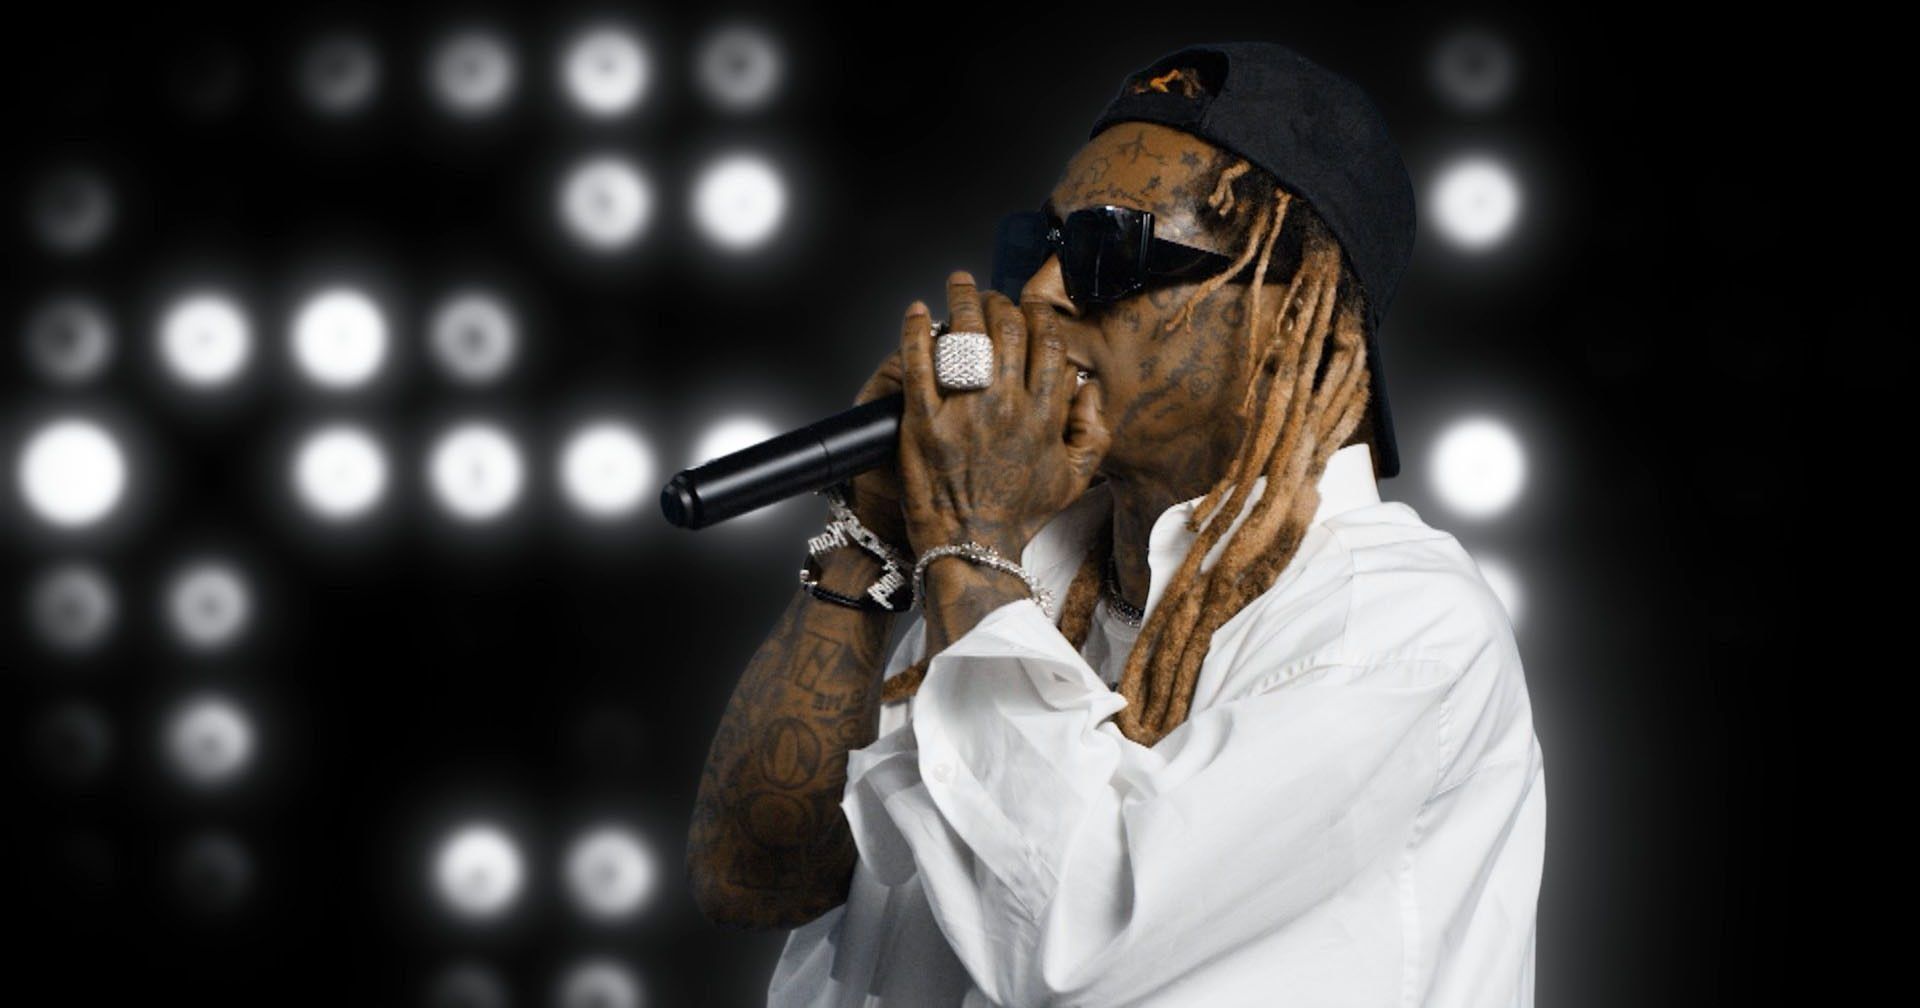 VARIOUS CITIES - JUNE 28: In this screengrab, Lil Wayne performs during the 2020 BET Awards. The 20th annual BET Awards, which aired June 28, 2020, was held virtually due to restrictions to slow the spread of COVID-19. (Photo by BET Awards 2020/Getty Images via Getty Images)